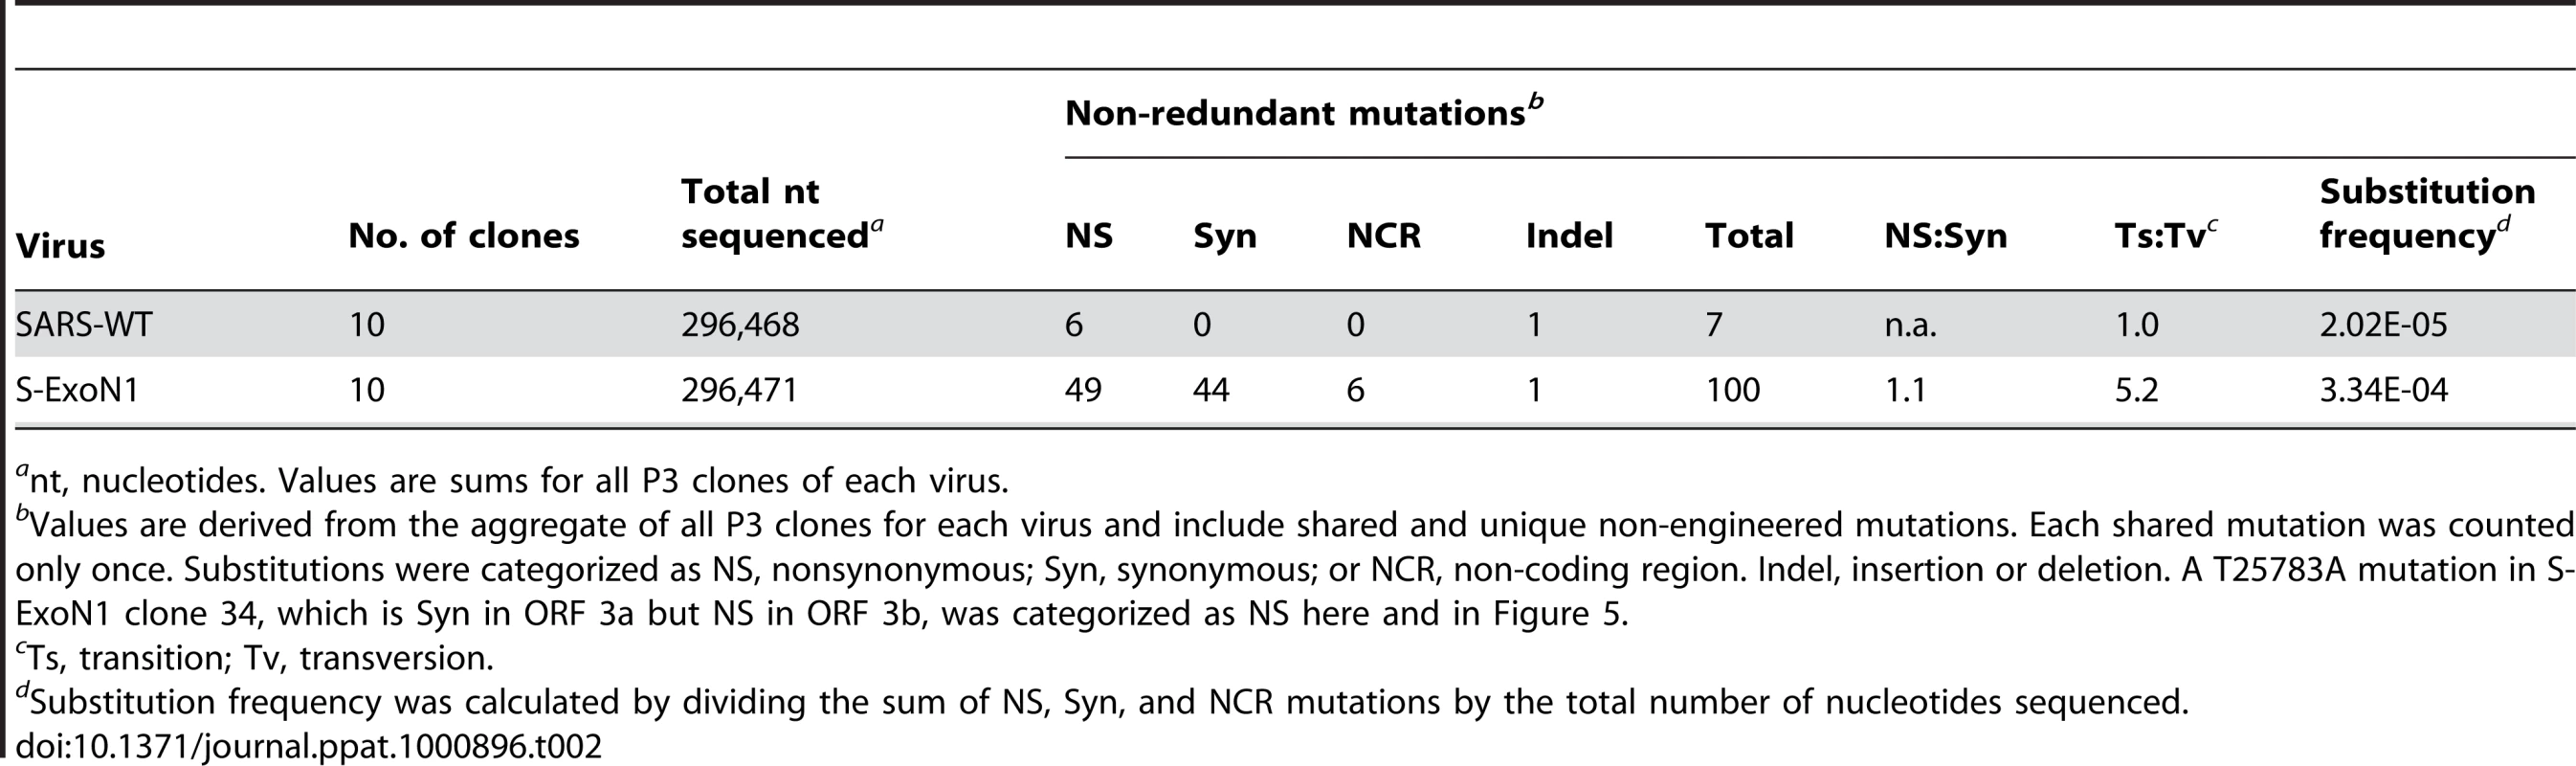 Mutation types and frequencies.